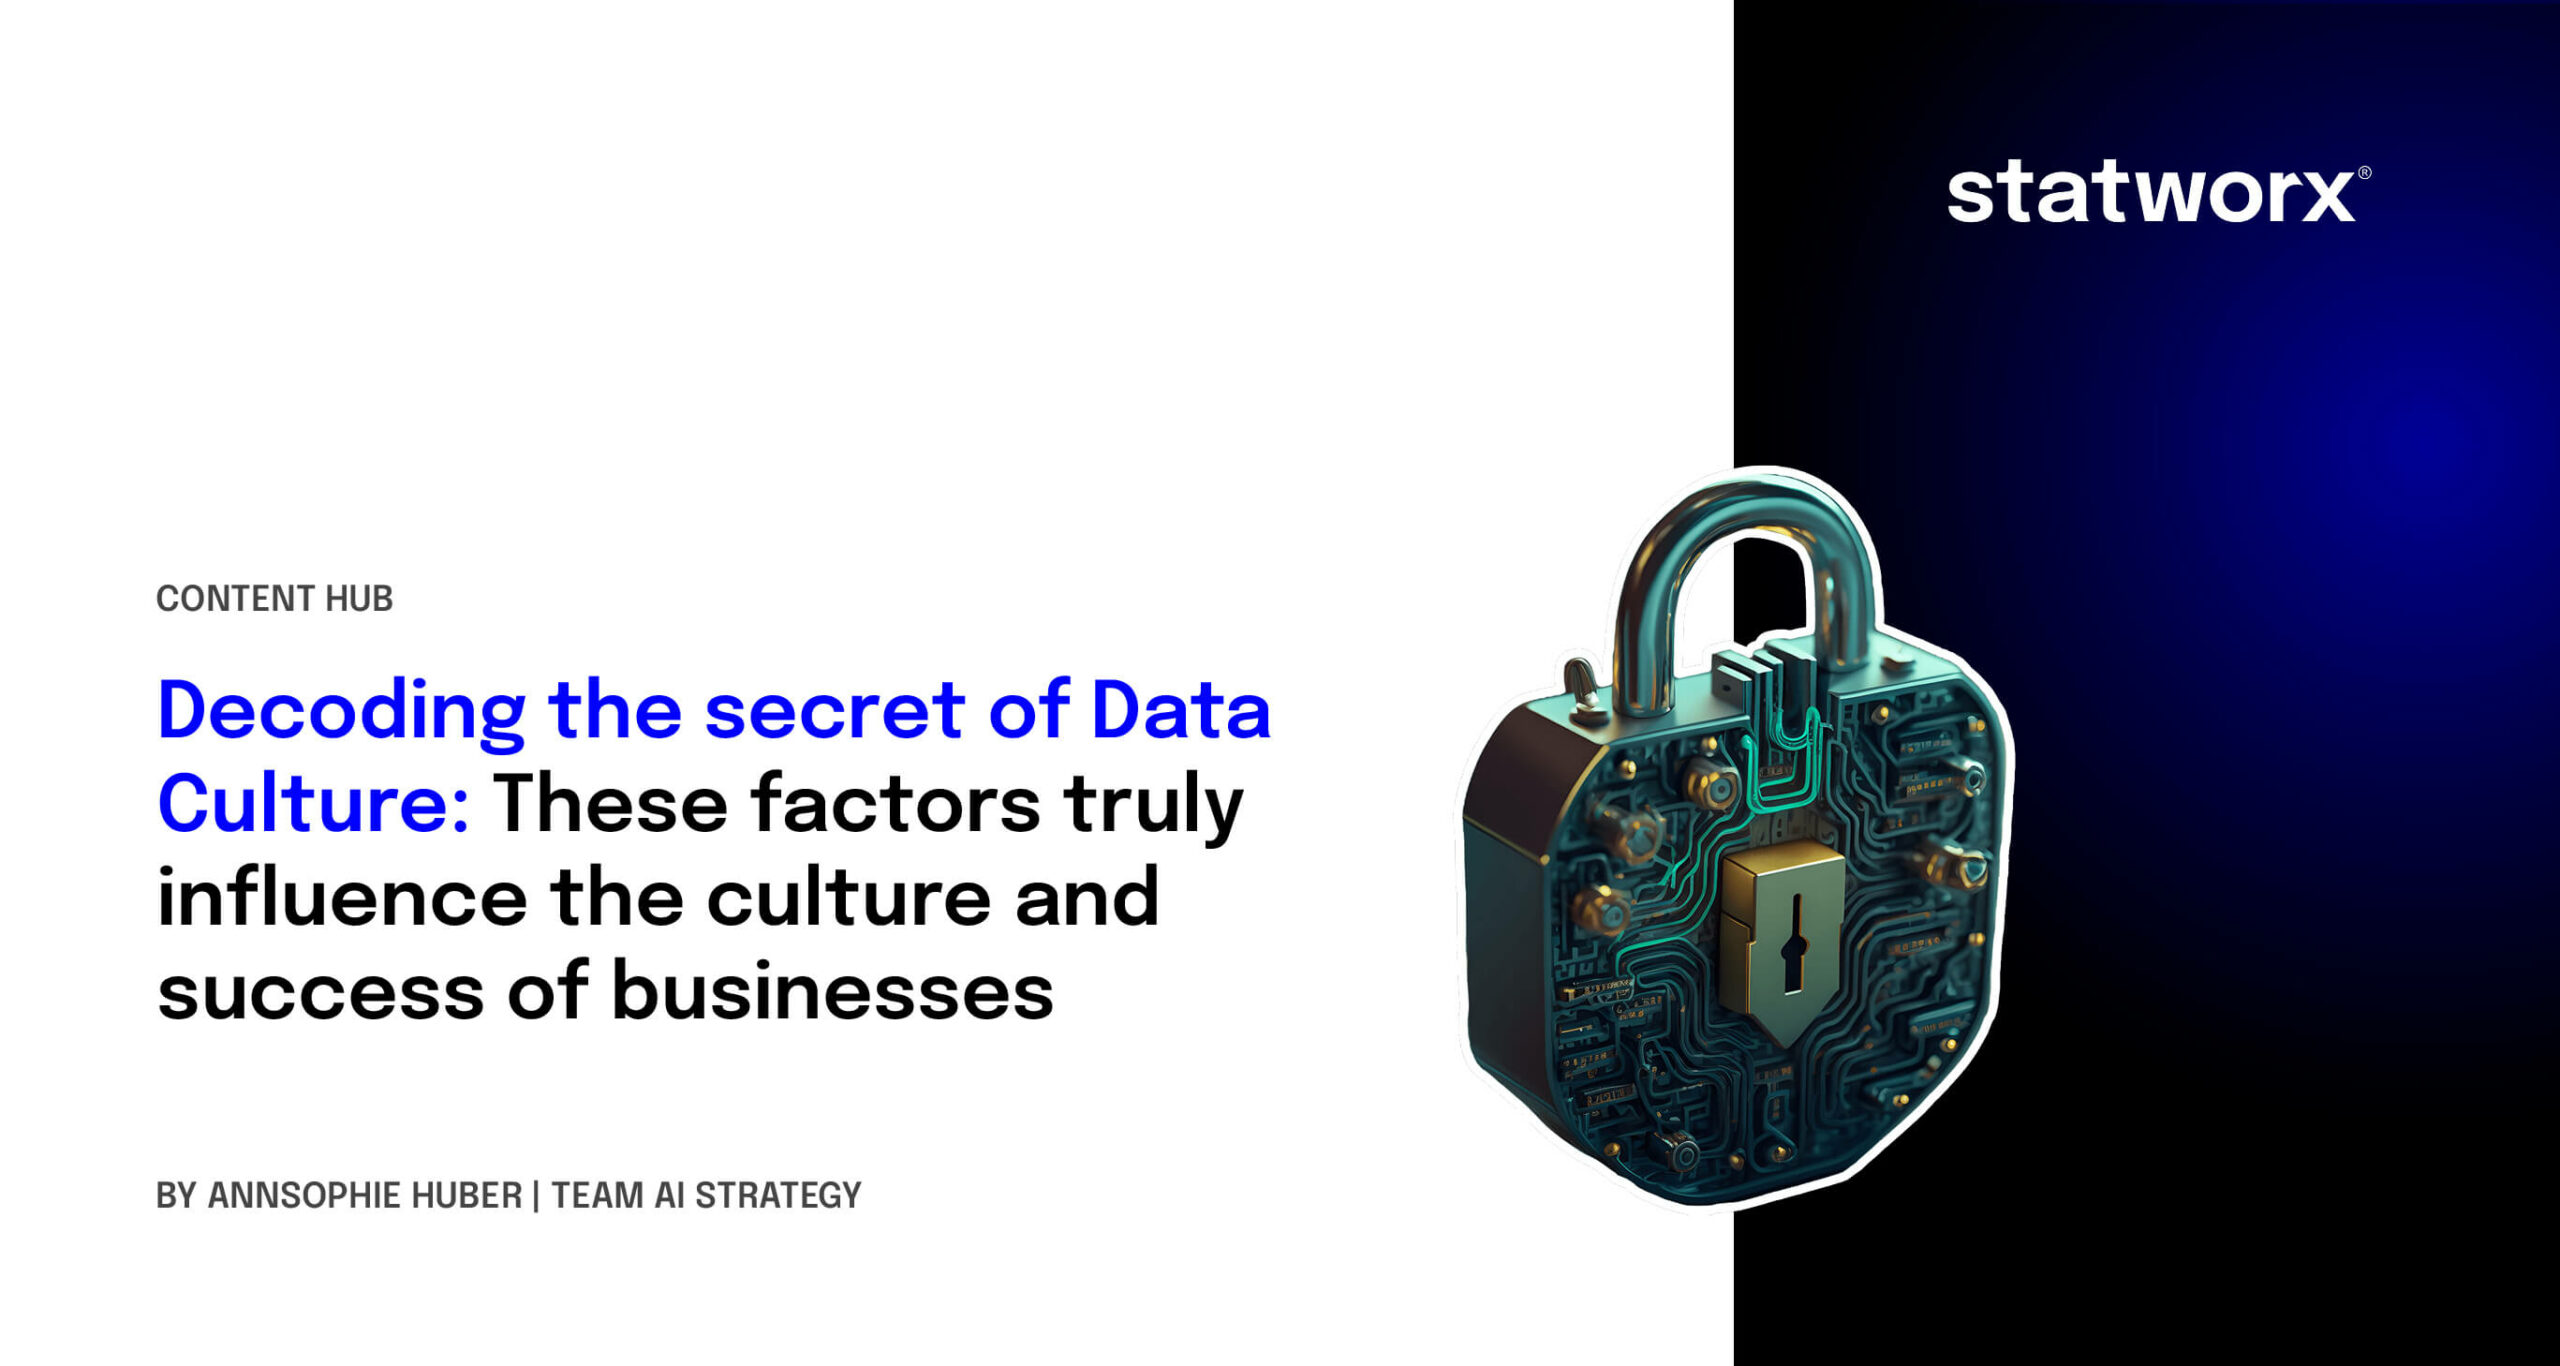 Decoding the secret of Data Culture: These factors truly influence the culture and success of businesses